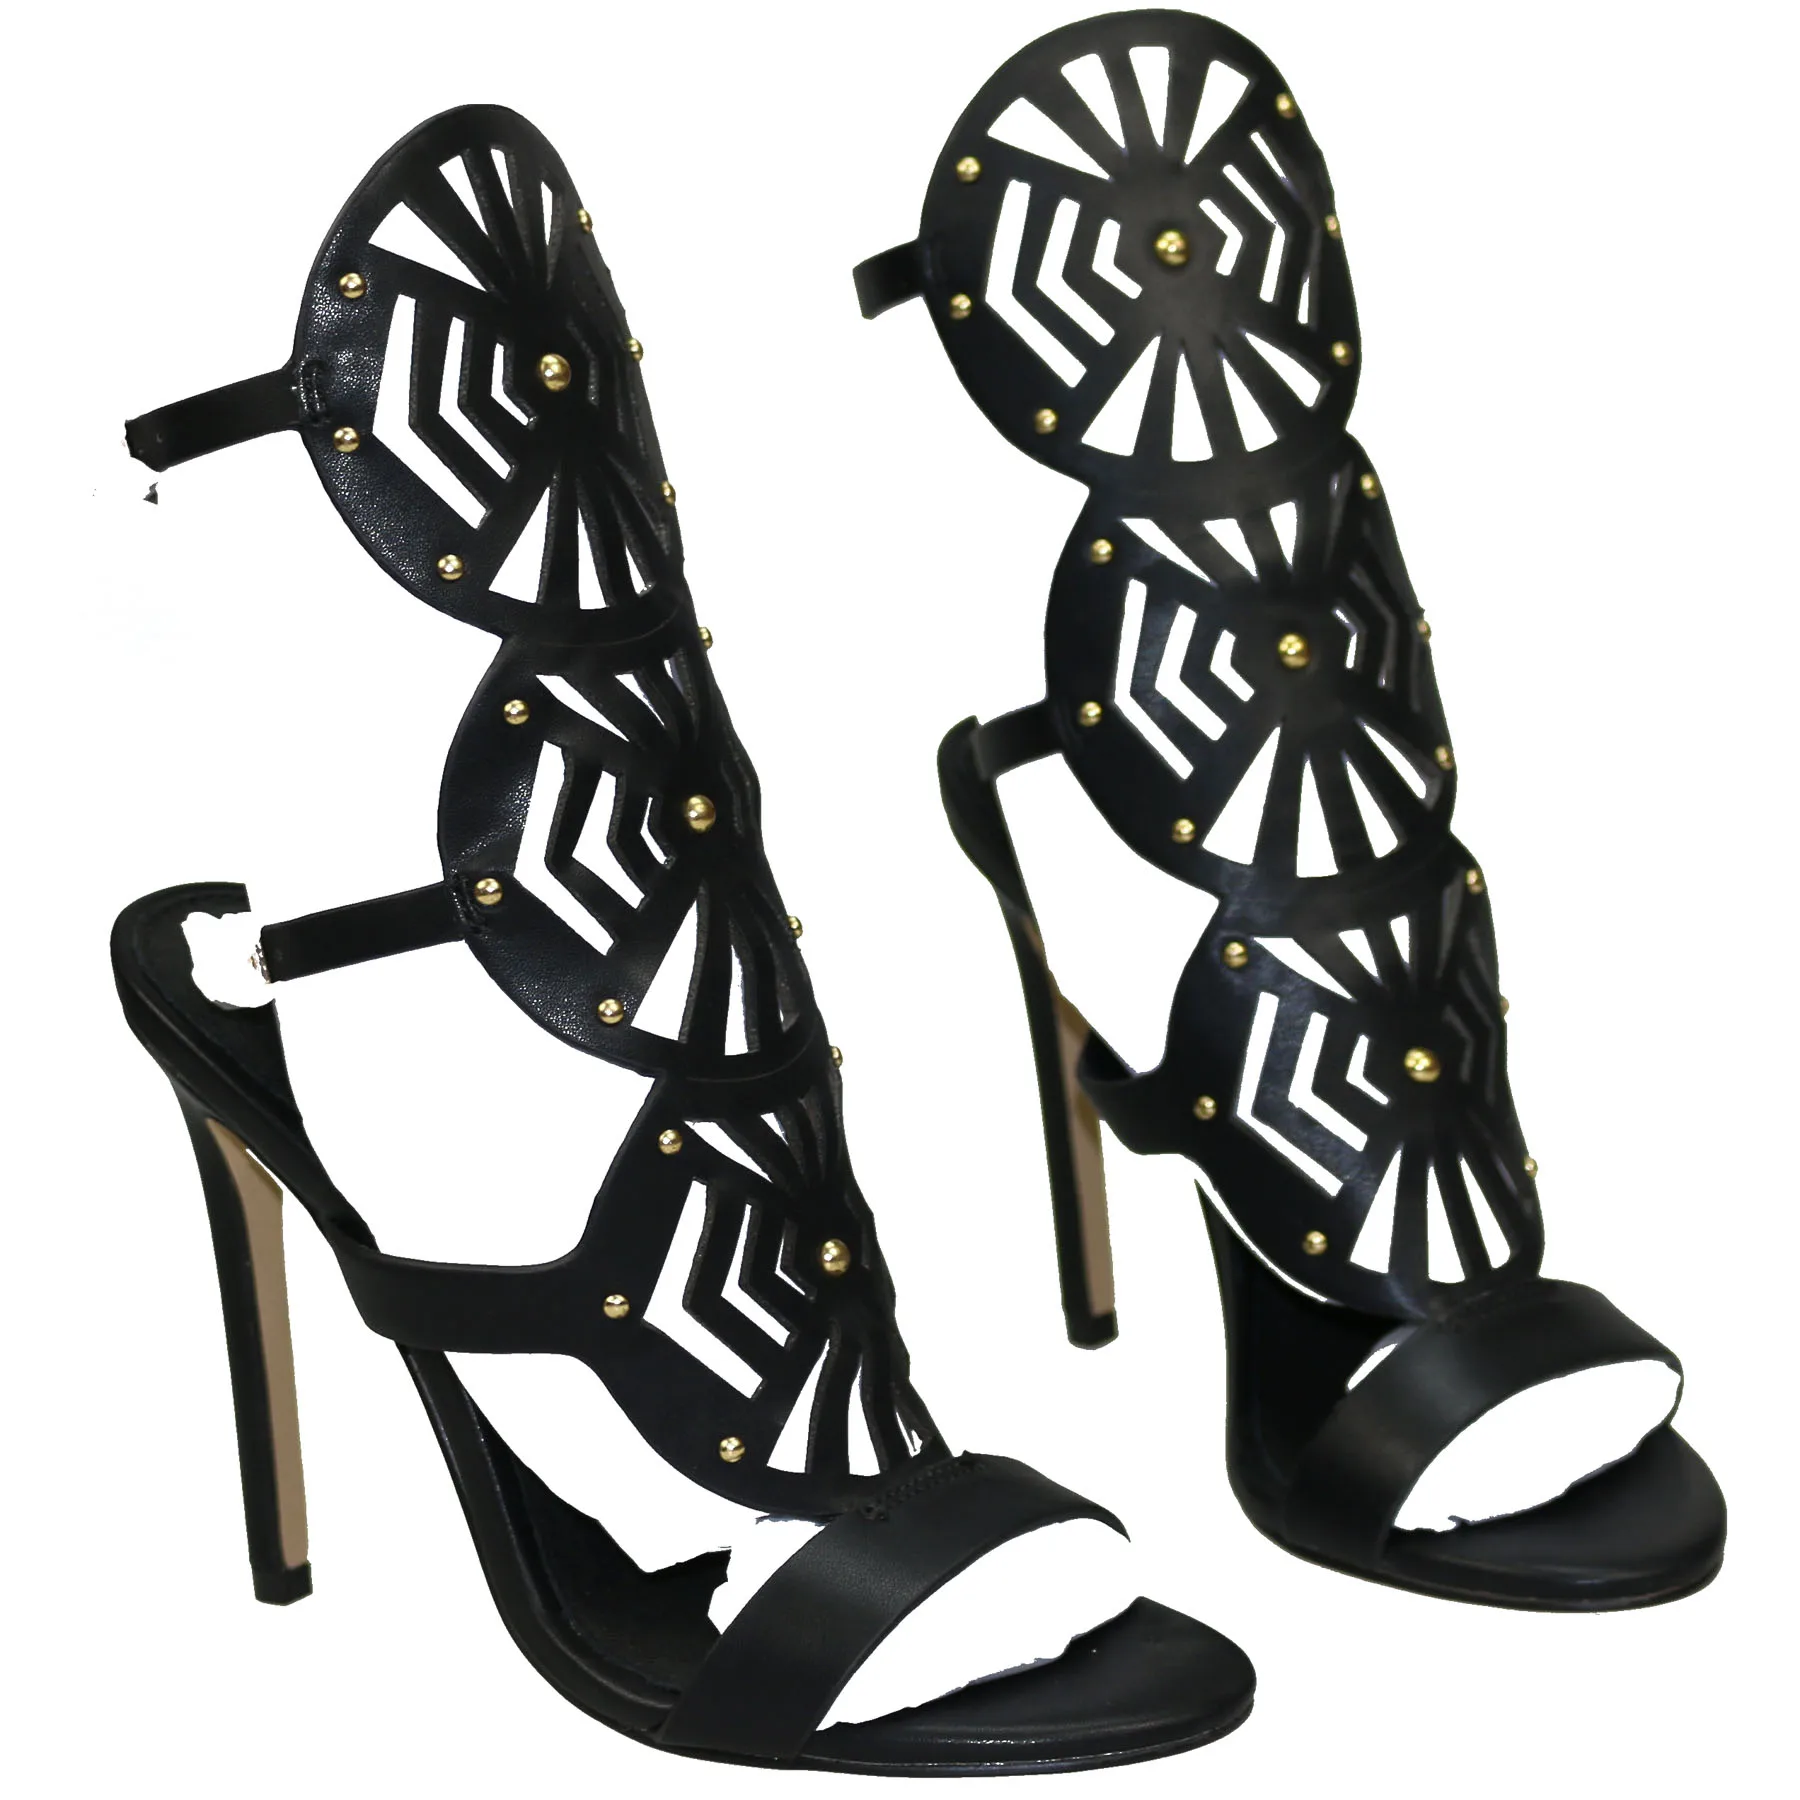 

Sexy Woman Spider Shape Cutout Sandals Rivets Studded Strap Buckled Thin High Heels Gladiator Open Toe Party Wedding Shoes